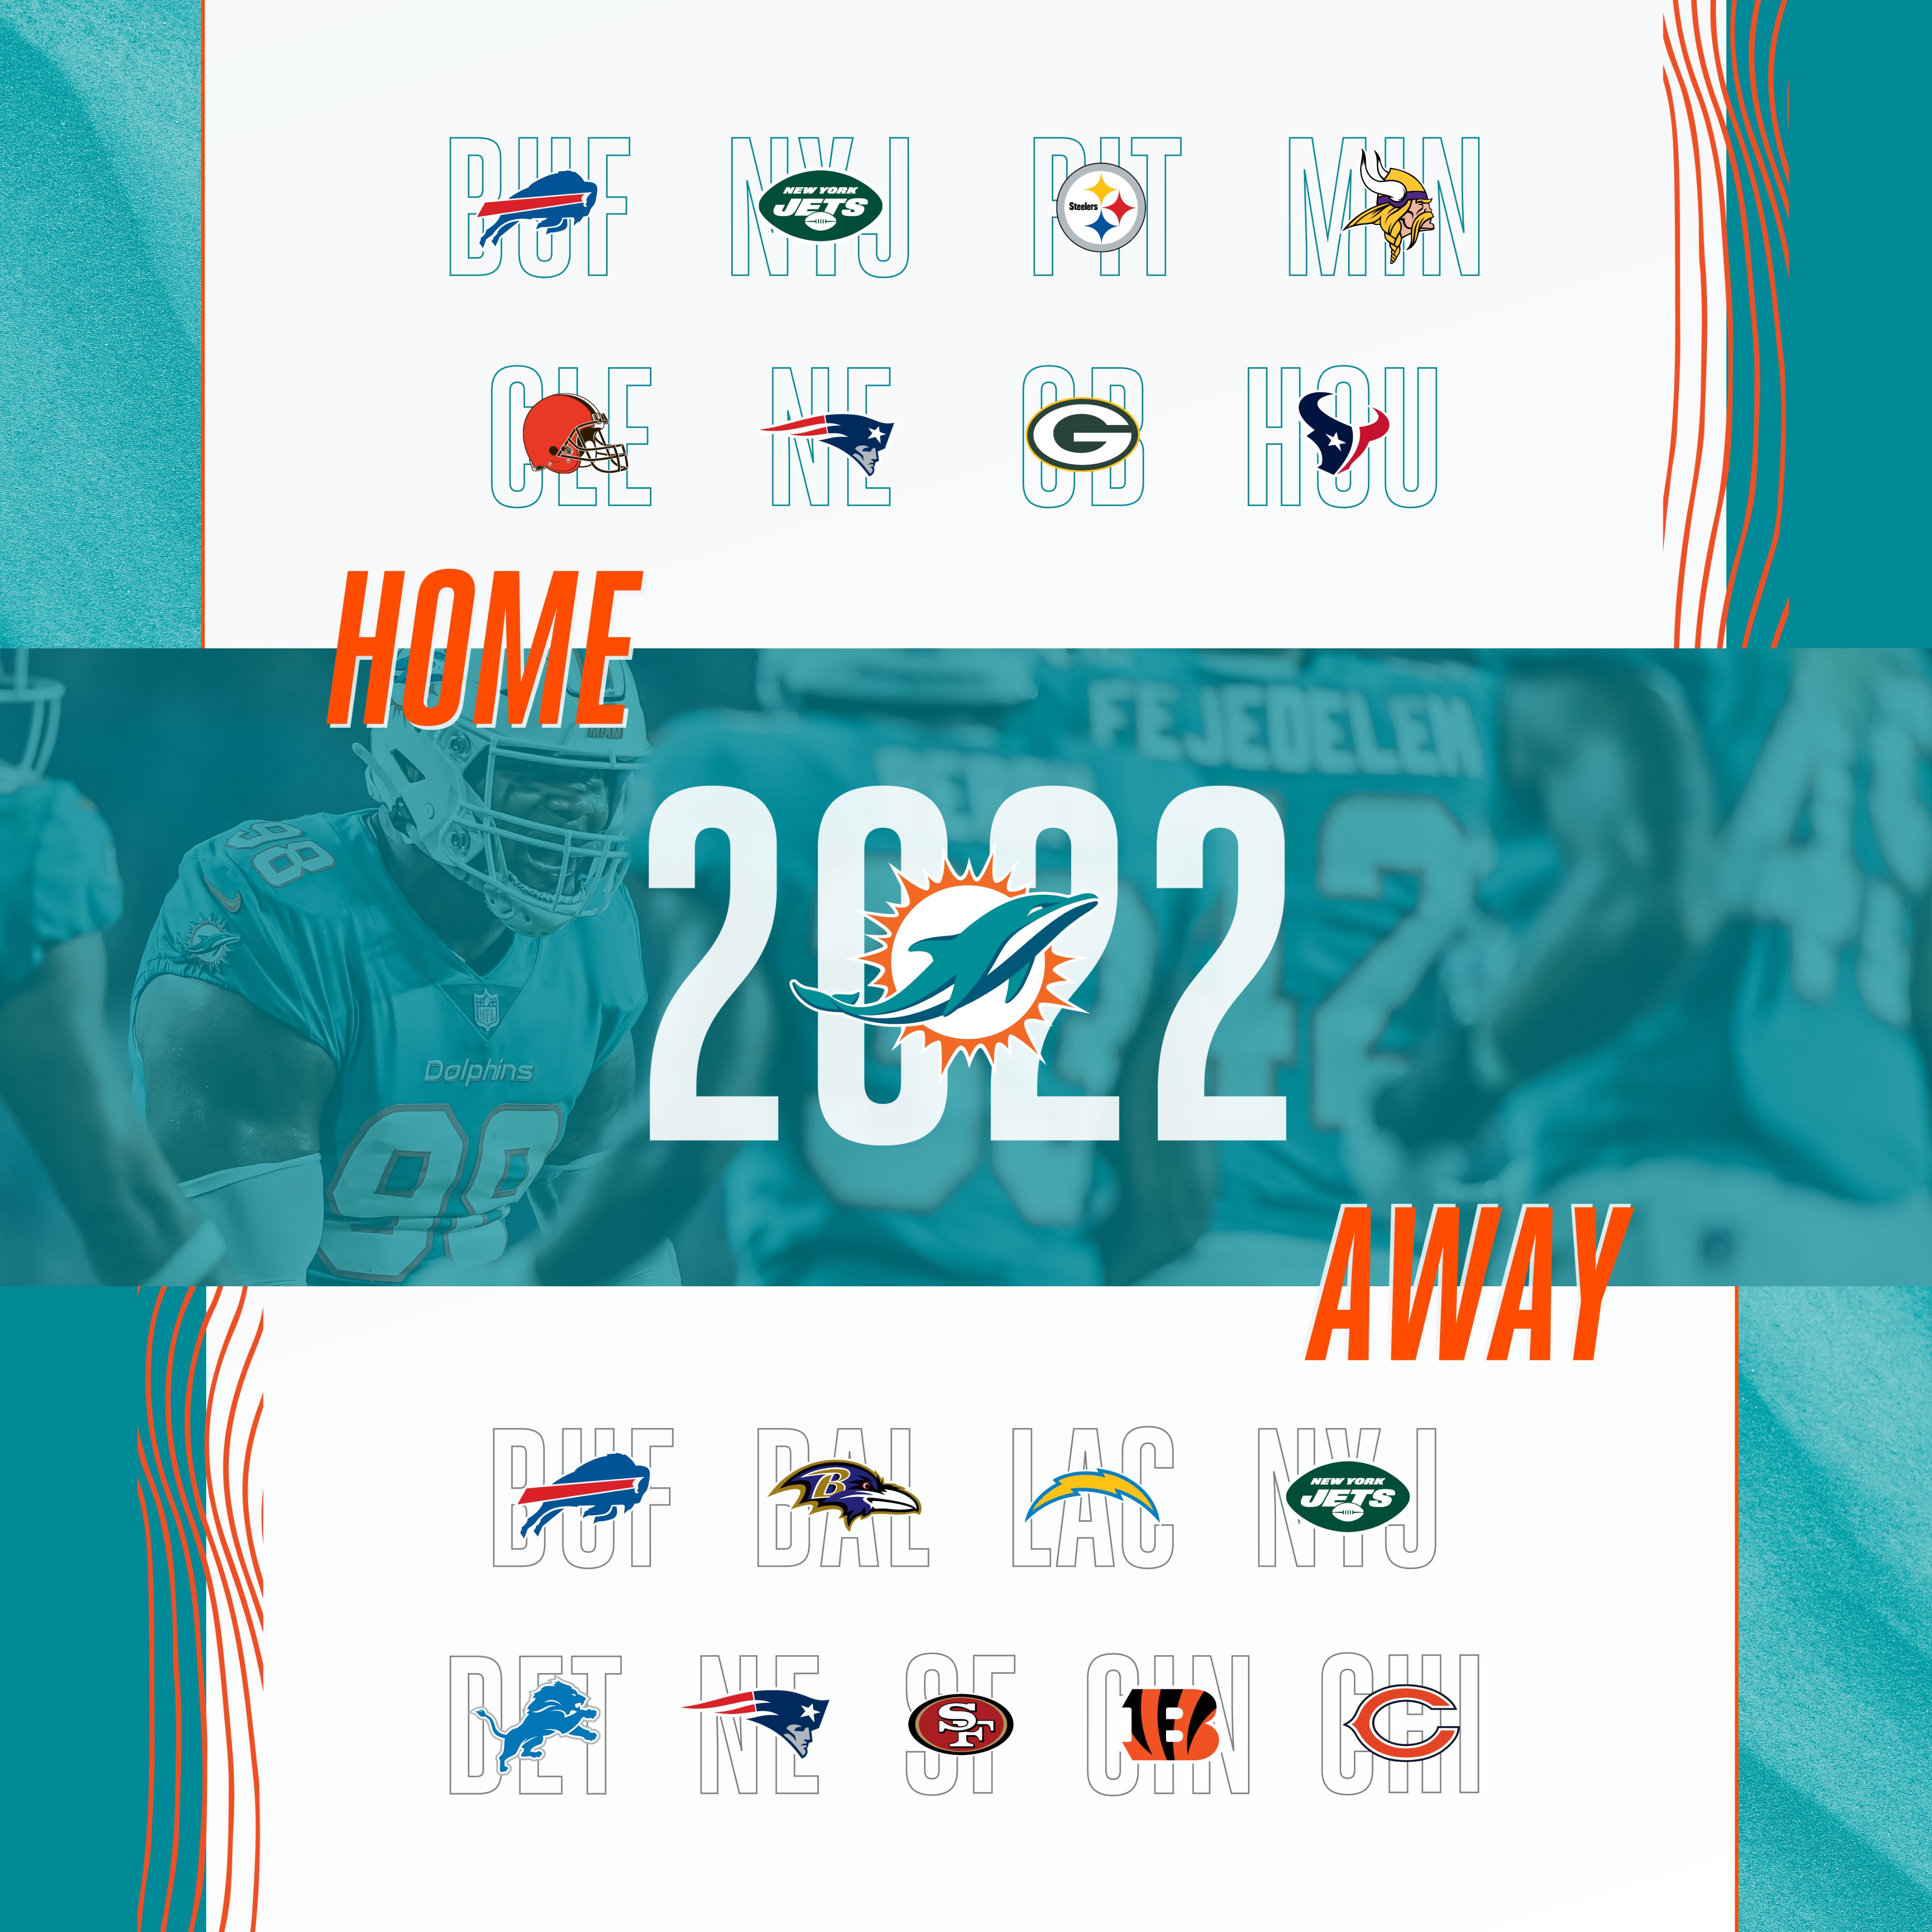 2022 miami dolphins football schedule